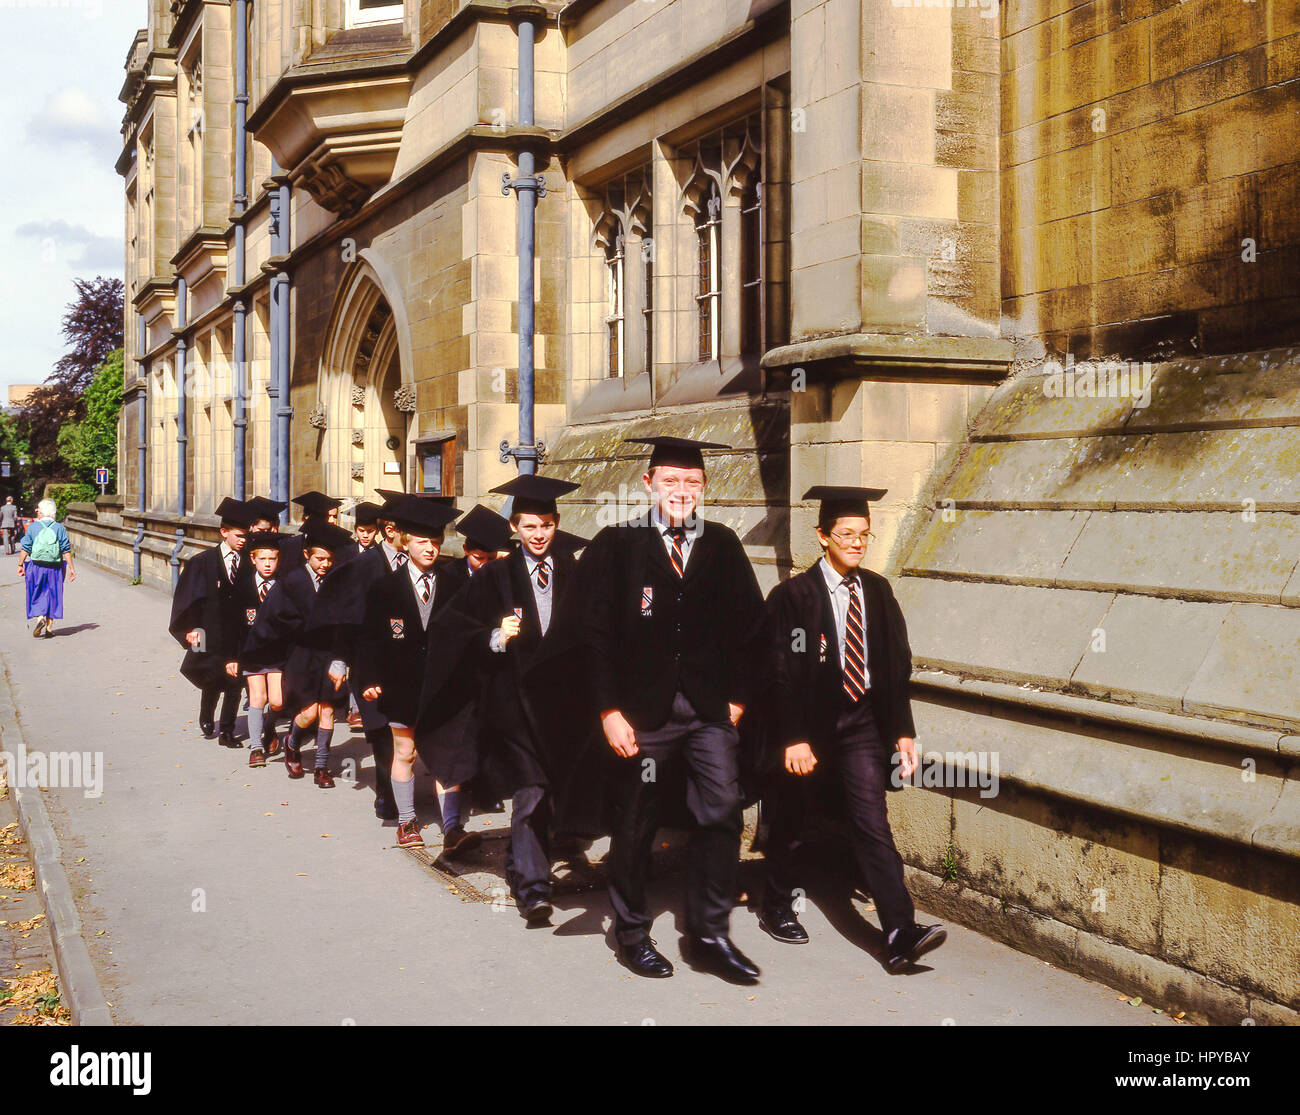 Secondary school boys in gowns on High Street, Oxford, Oxfordshire, England, United Kingdom Stock Photo